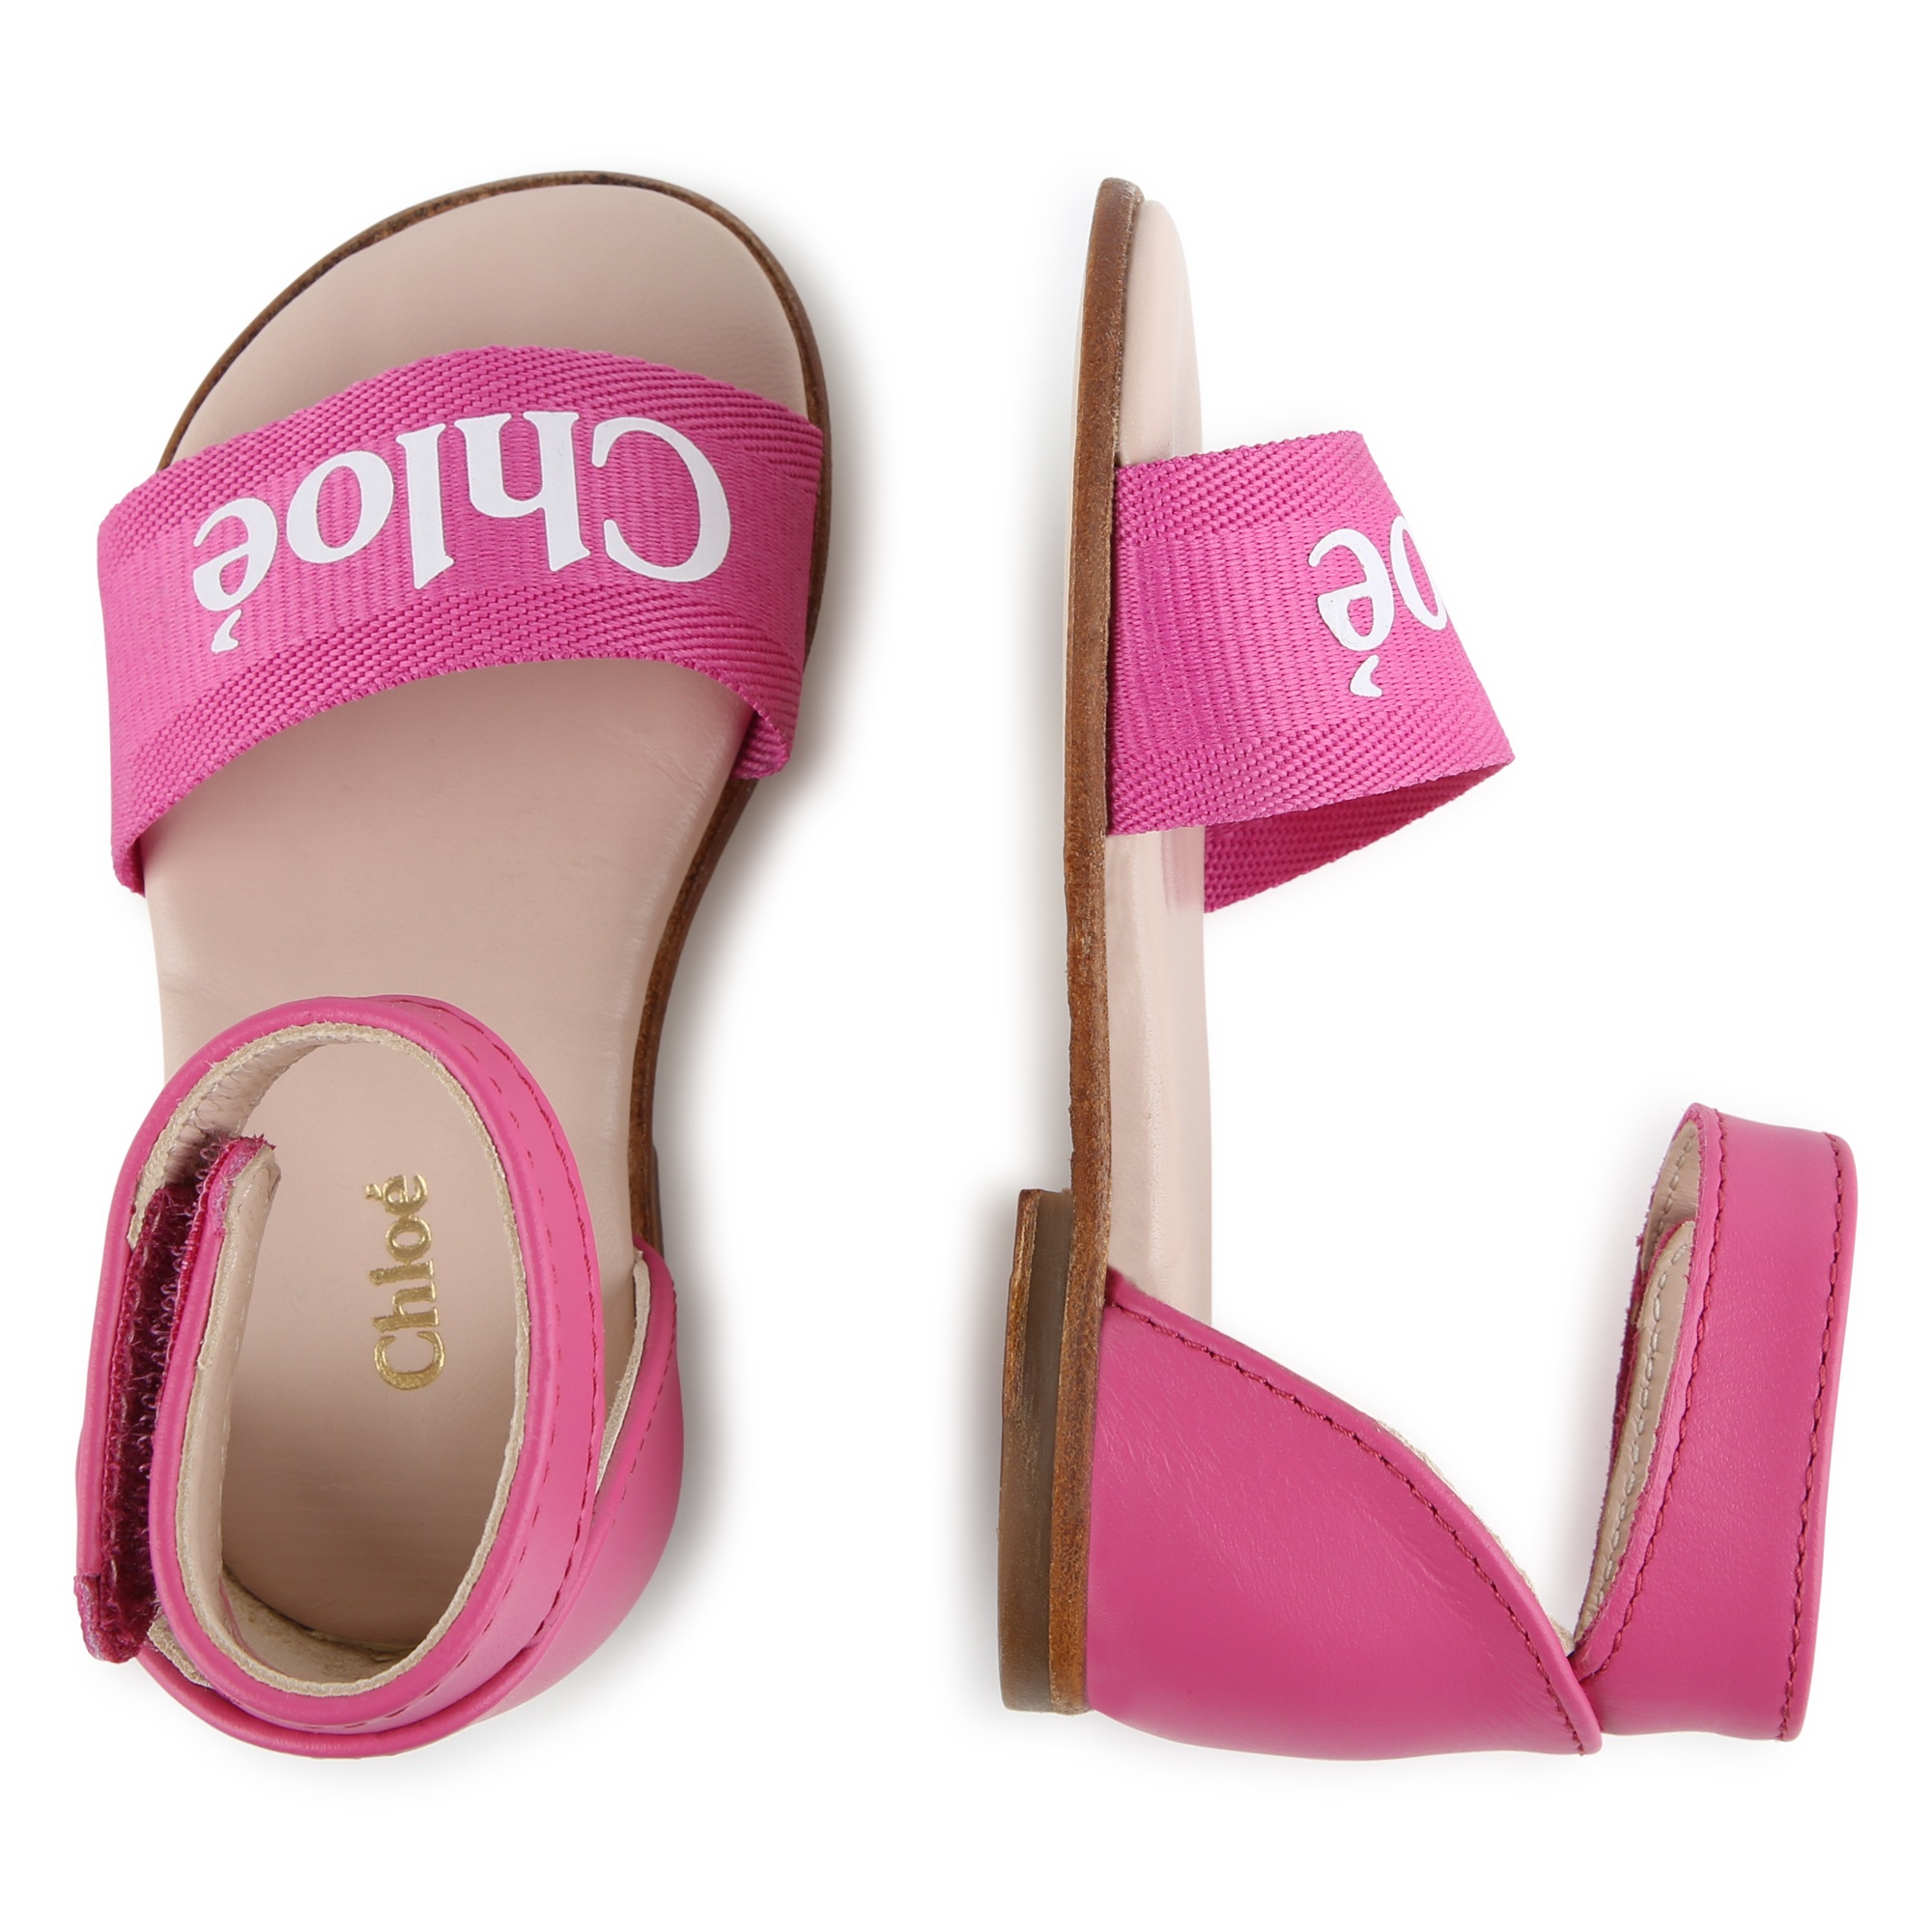 Sandals with ankle strap CHLOE for GIRL